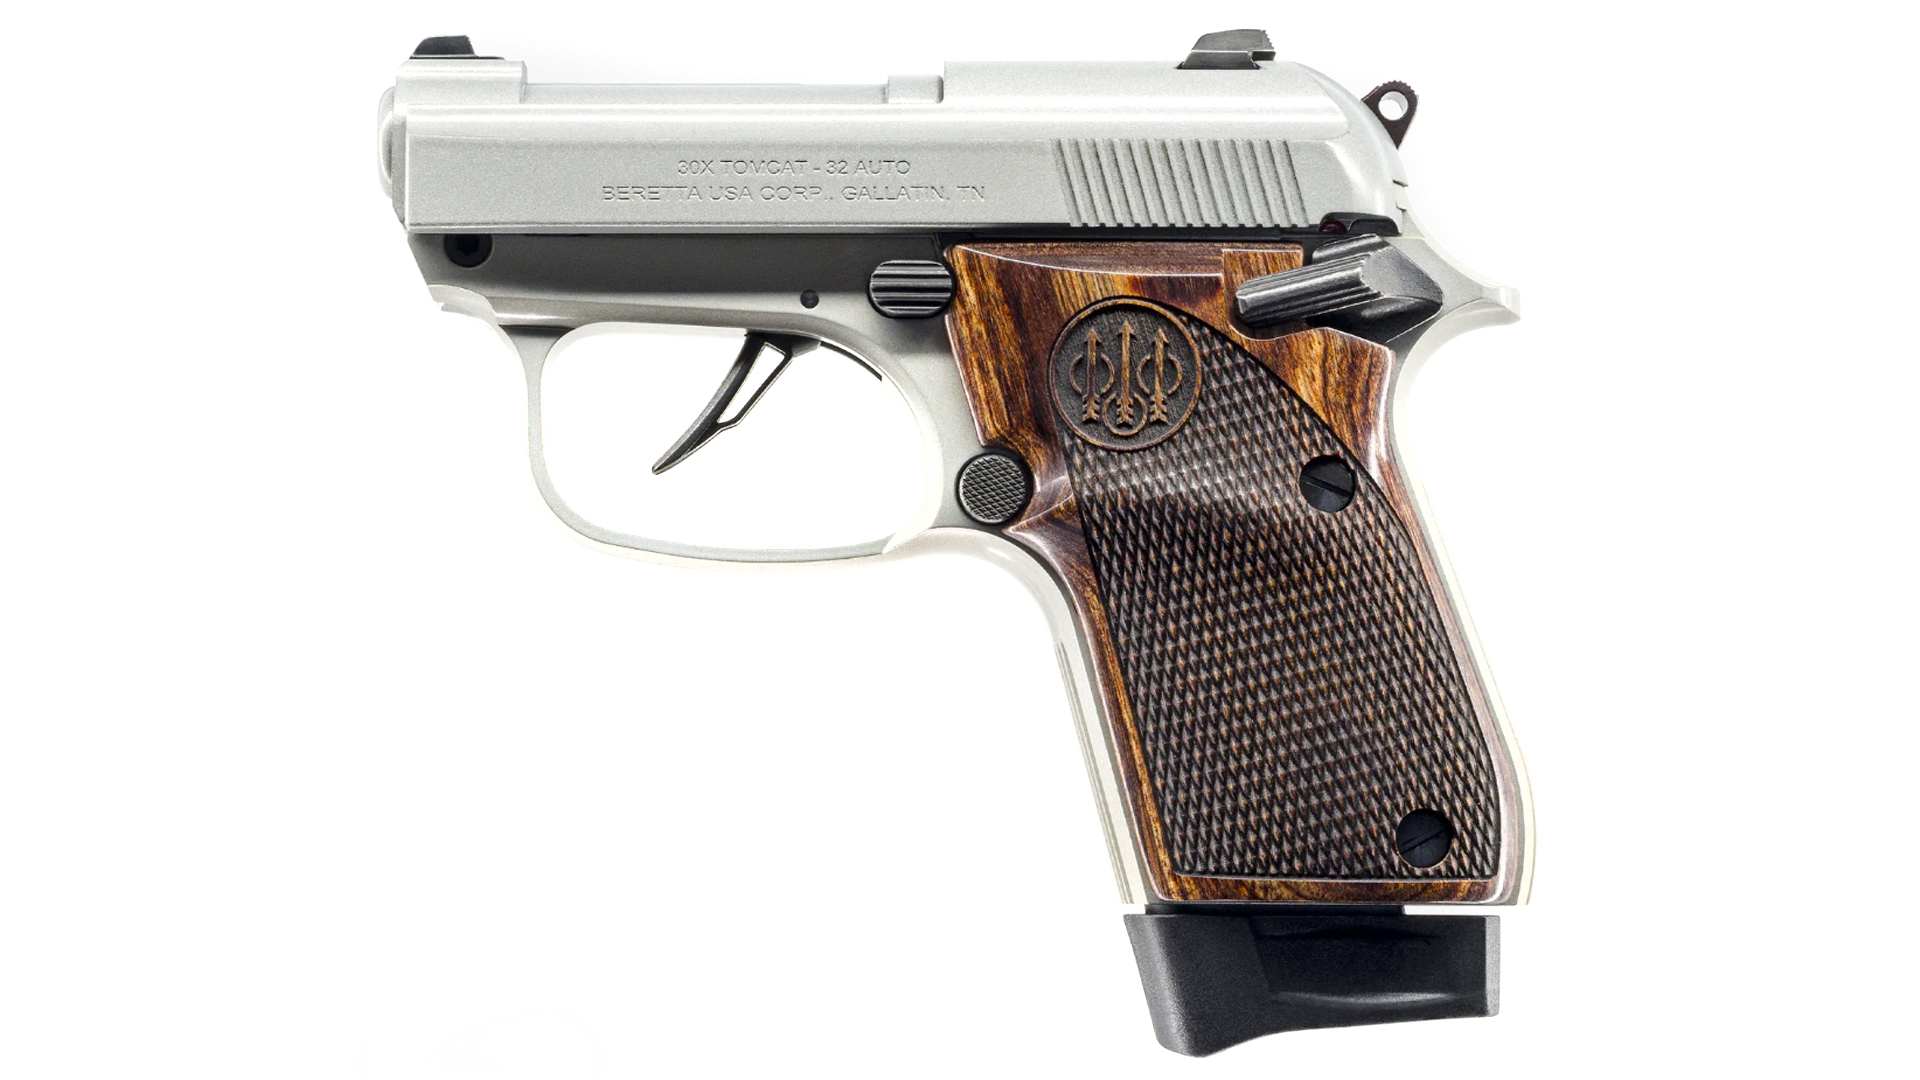 Left-side view of the Beretta 30X pistol with the barrel closed.